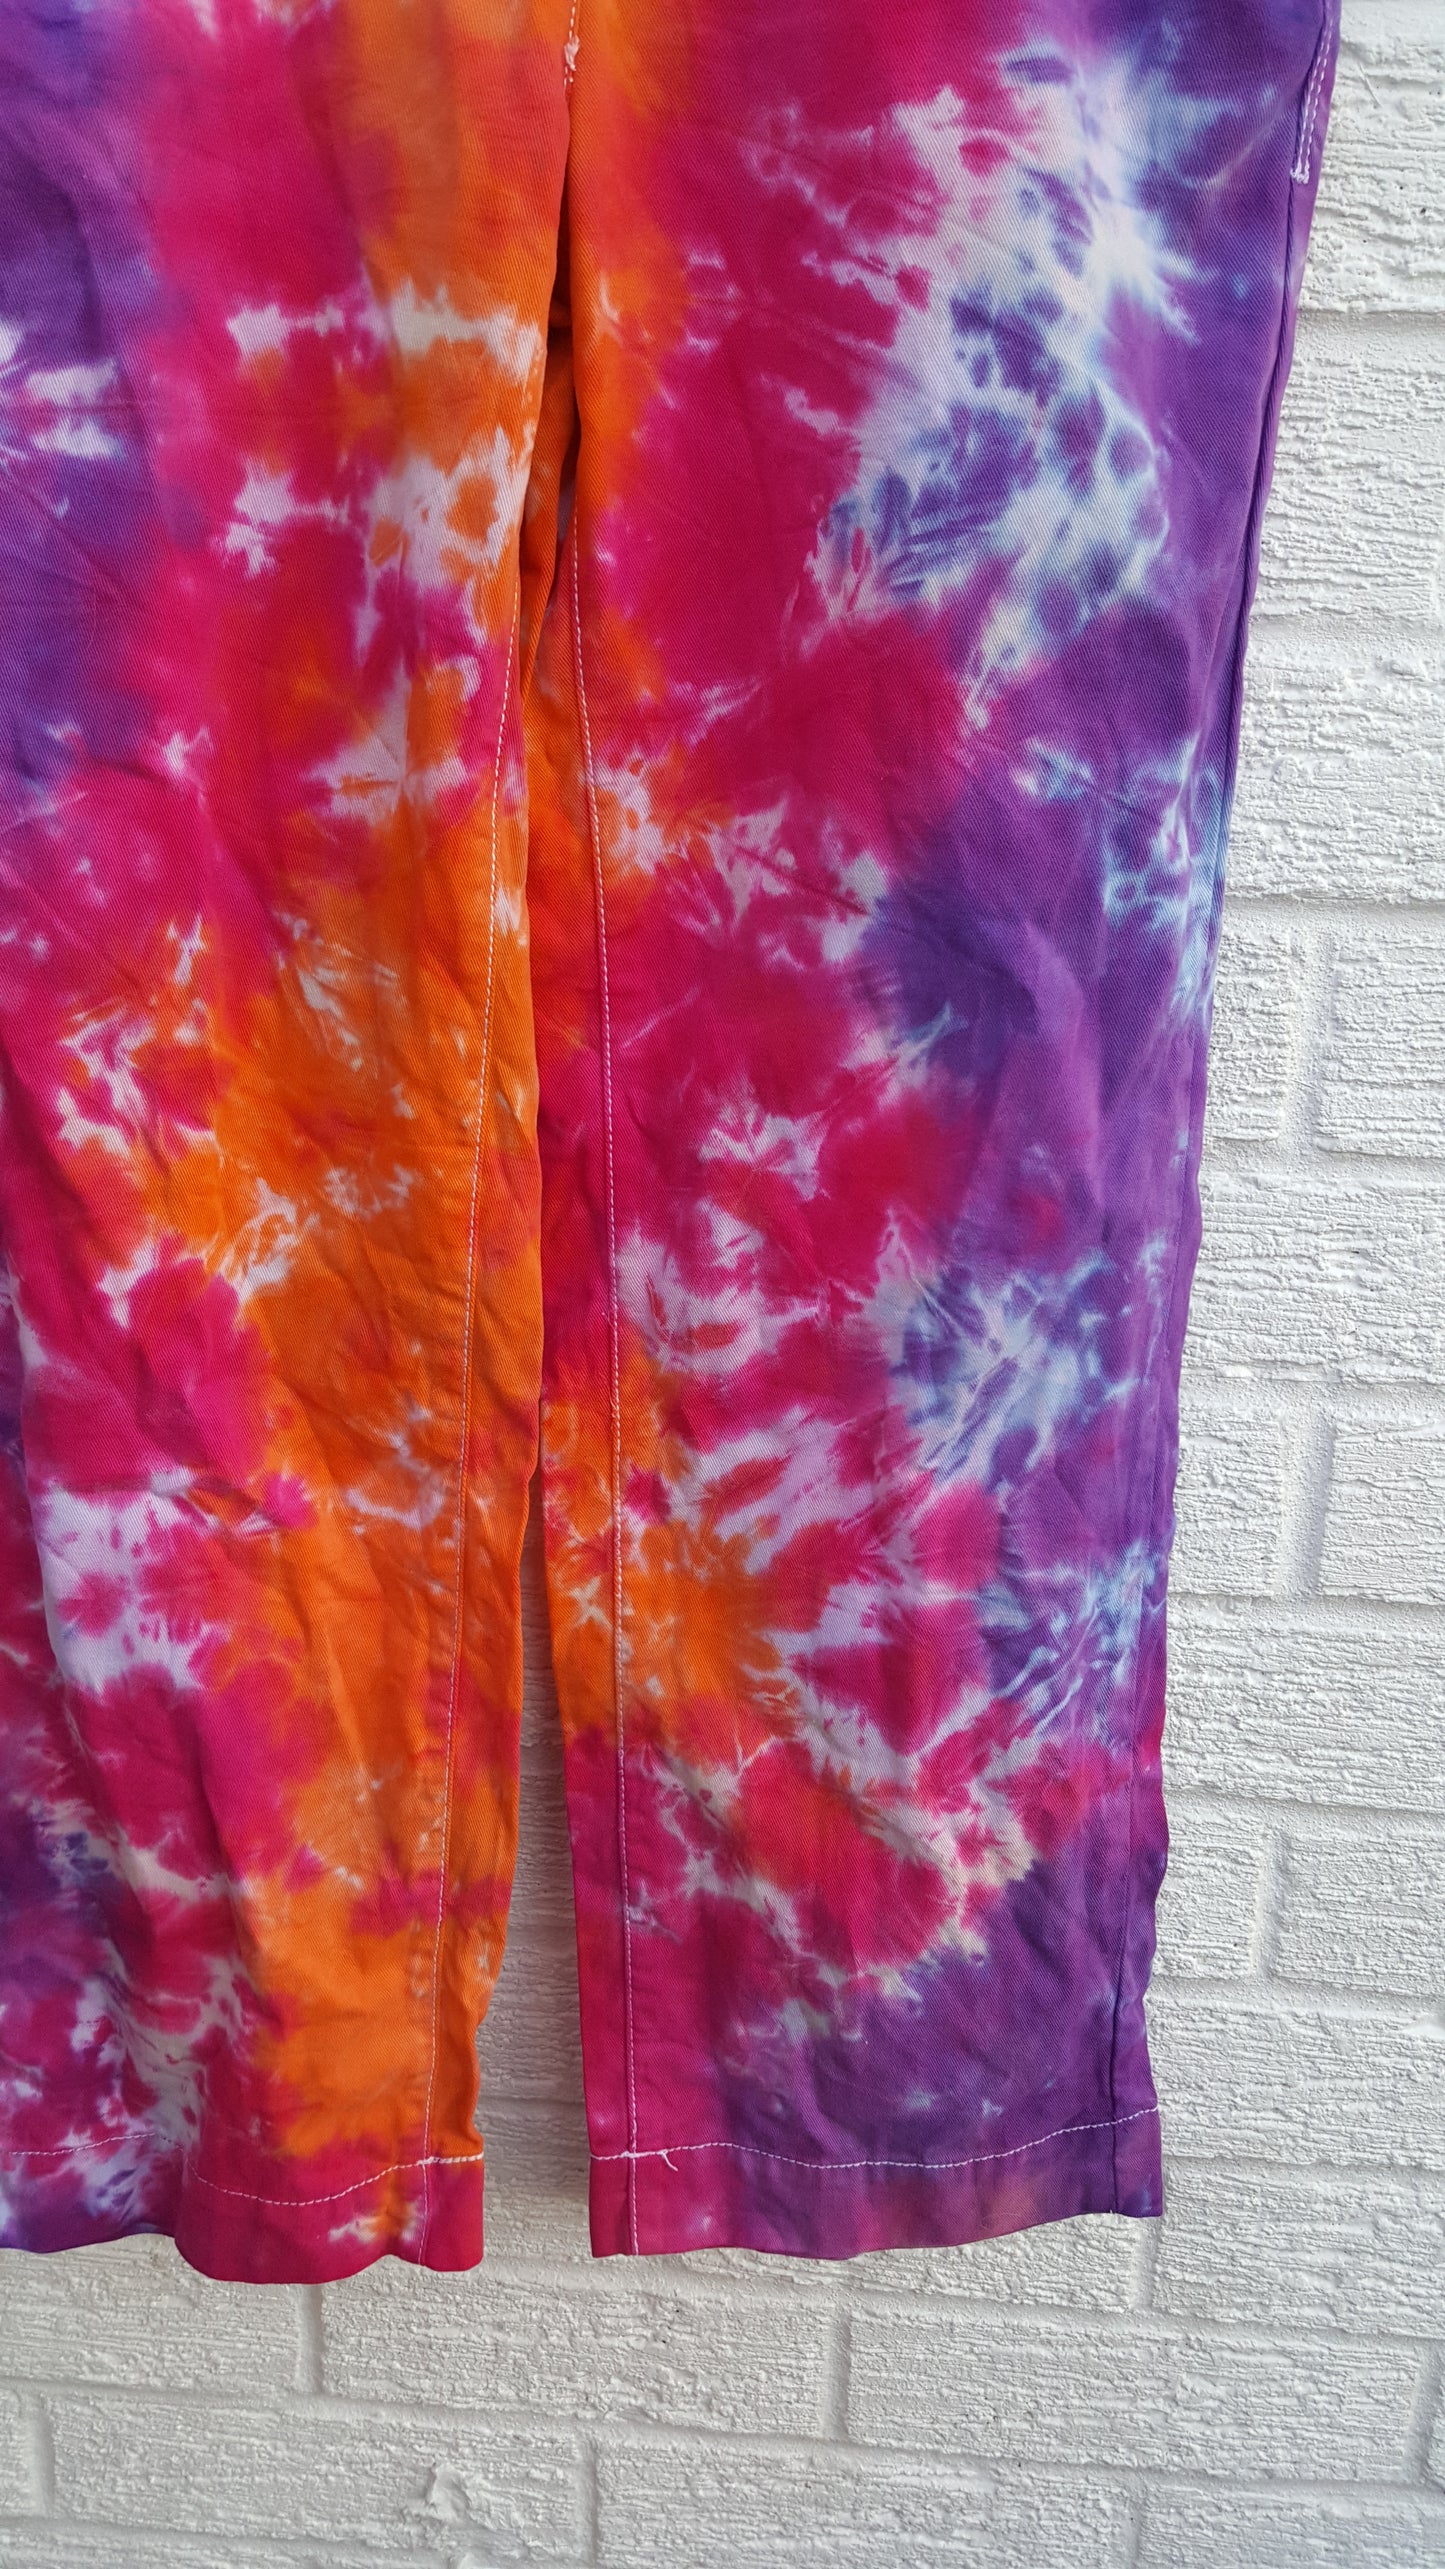 Tie dye trousers, in bright orange, pink and purple shades - perfect for the hippie at heart! In 100% Cotton to fit UK size 6R or US size 2.  These trousers were thrifted and upcycled using cold water, eco reactive dyes, so they're not just unique, they're friendlier to the environment too.  Hand dyed with love by AbiDashery.  We only use recycled and compostable packaging!